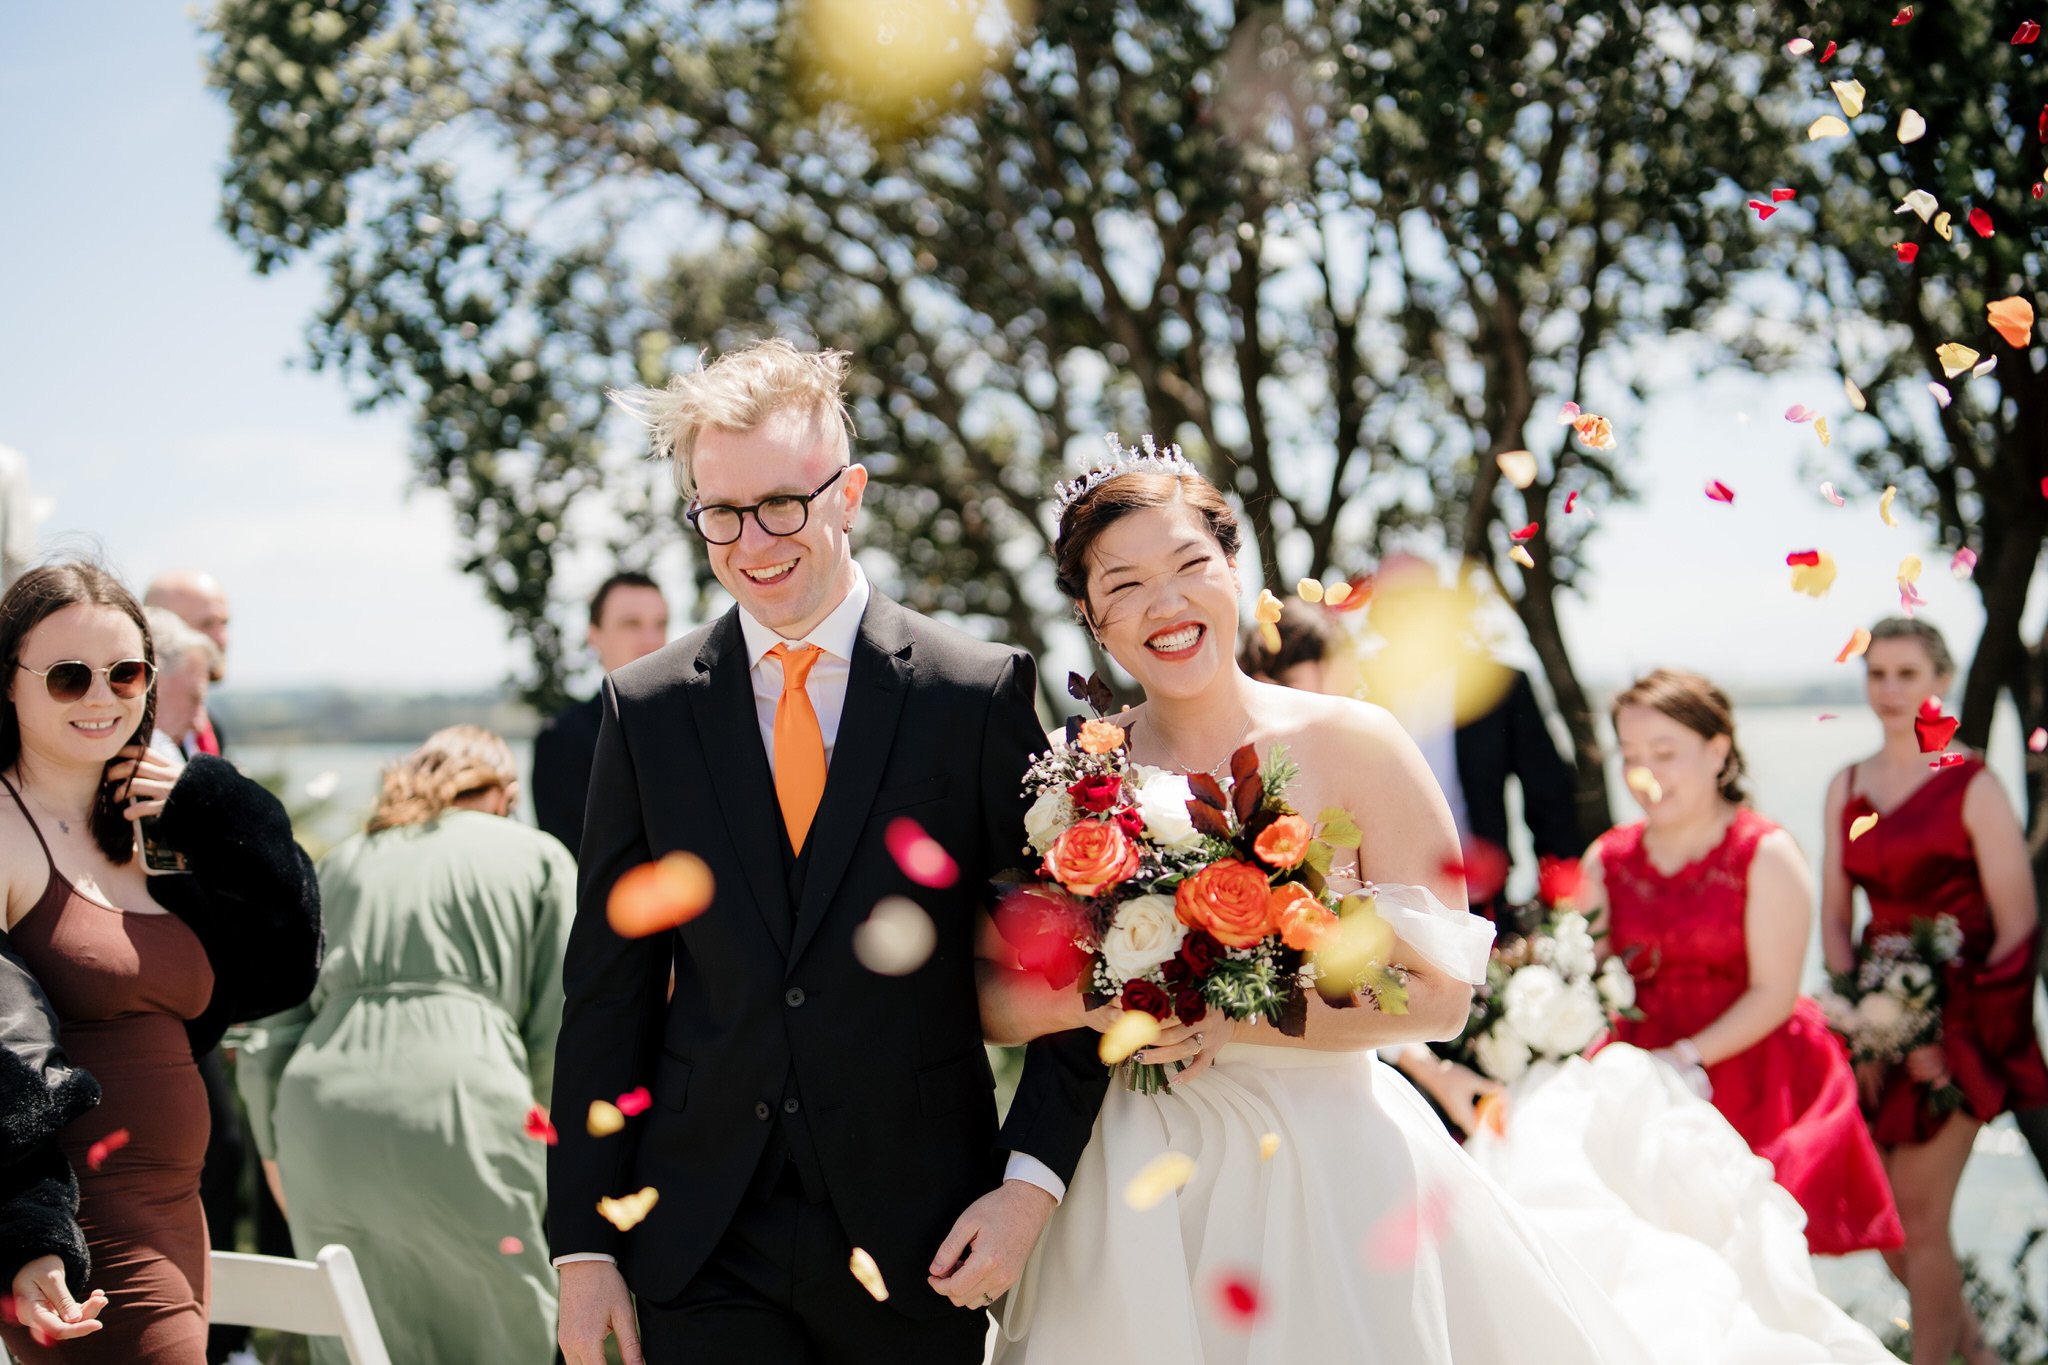 huntly-house-auckland-wedding-venue-mansion-vintage-luxury-accommodation-photographer-videography-dear-white-productions-photo-film-south-clarks-beach (71).jpg